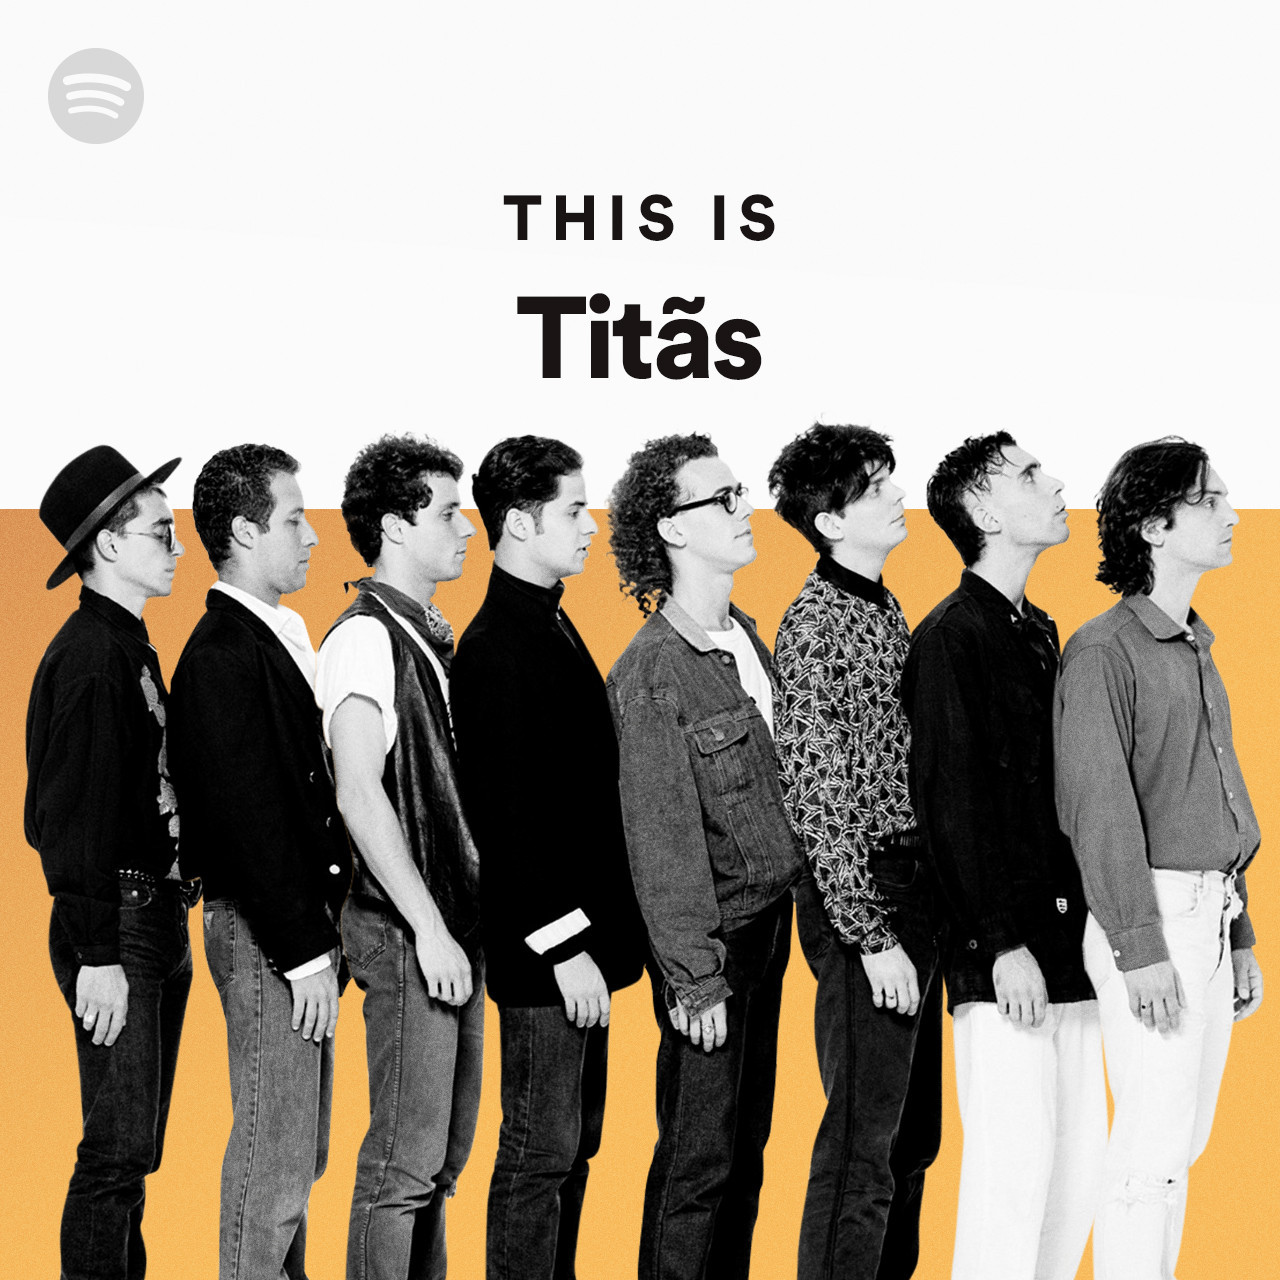 This Is Tribalistas - playlist by Spotify